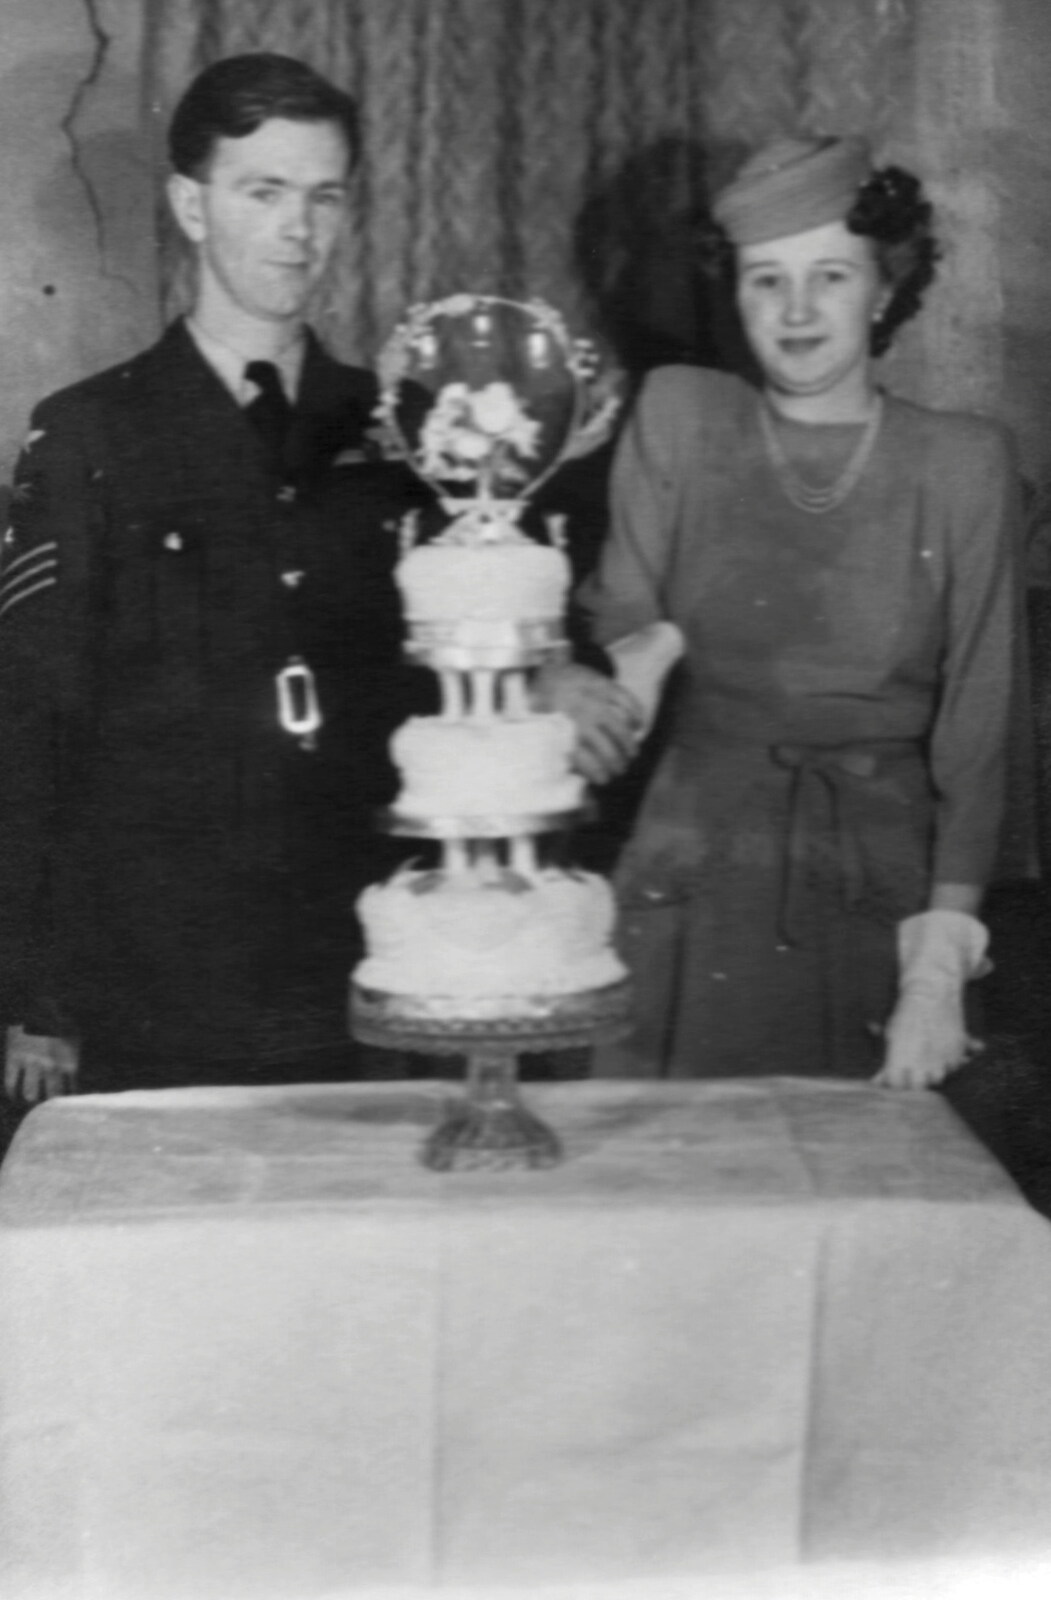 Joseph and Margaret cut the cake from Family History: The 1940s and 1950s - 24th January 2020